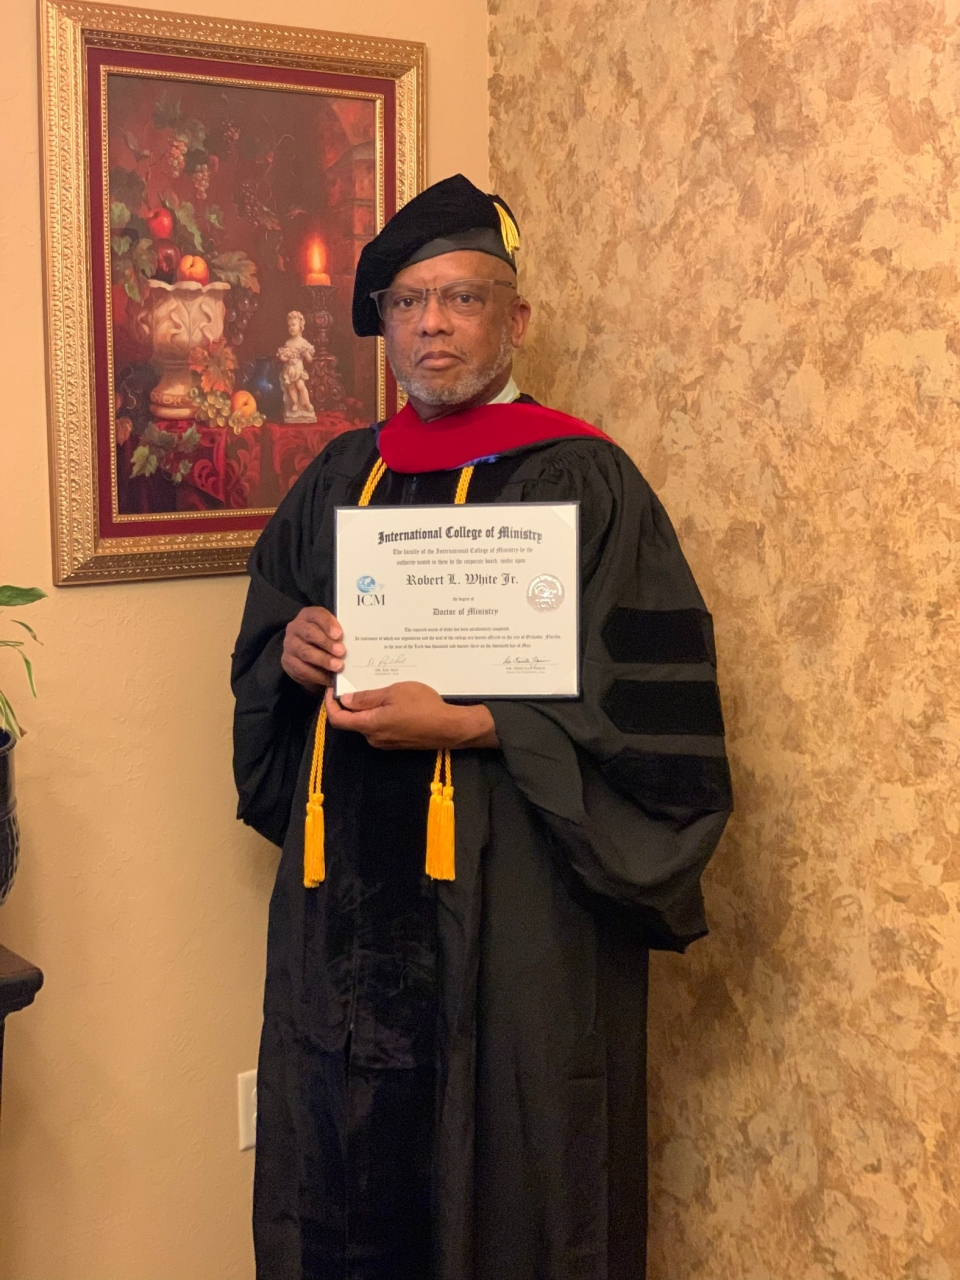 Congratulations to Robert White, Doctor of Ministry! We are very proud of your achievement.#ministry #seminarygraduate